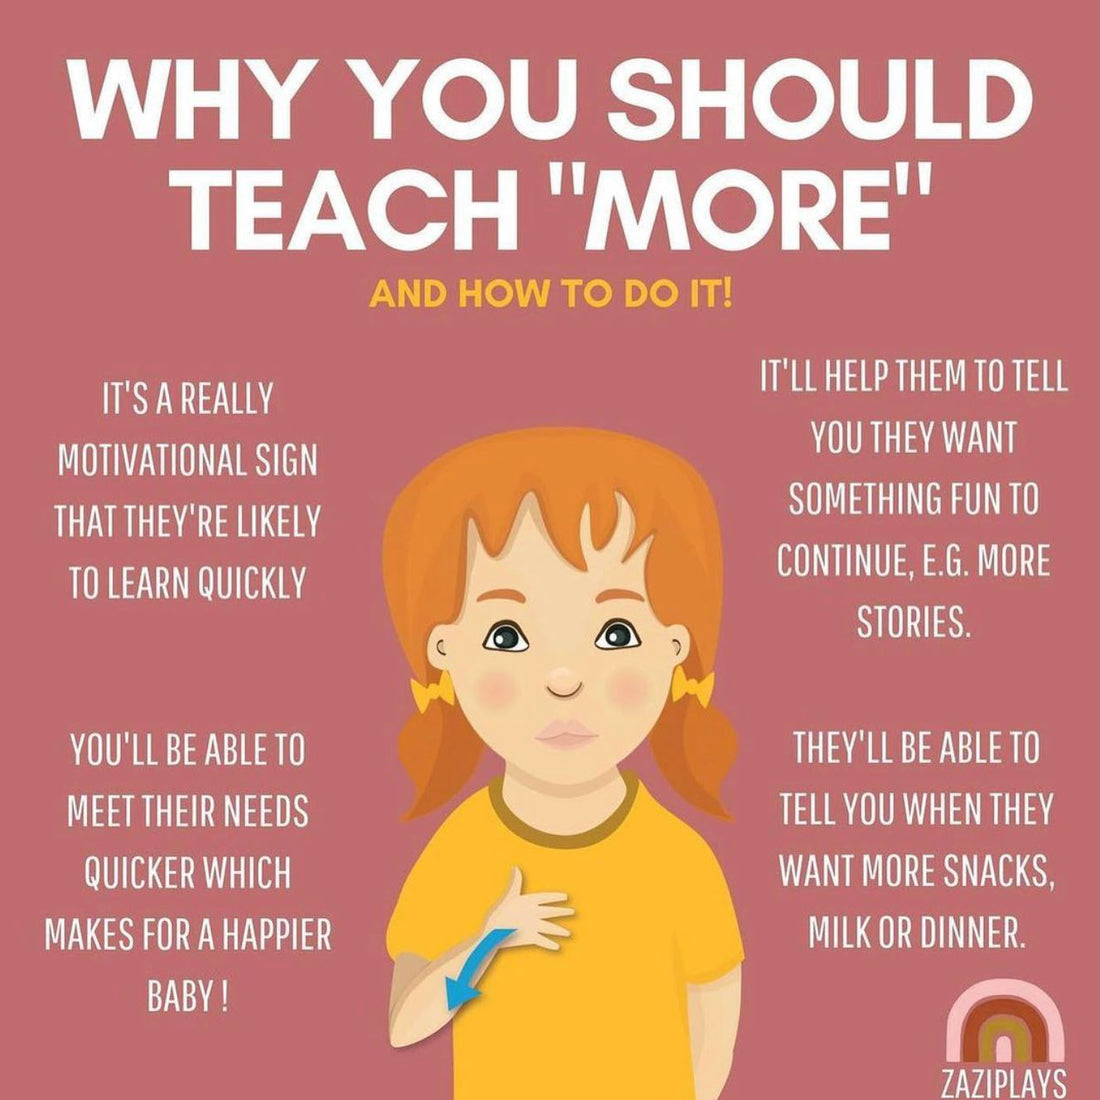 Why you should teach 'more'